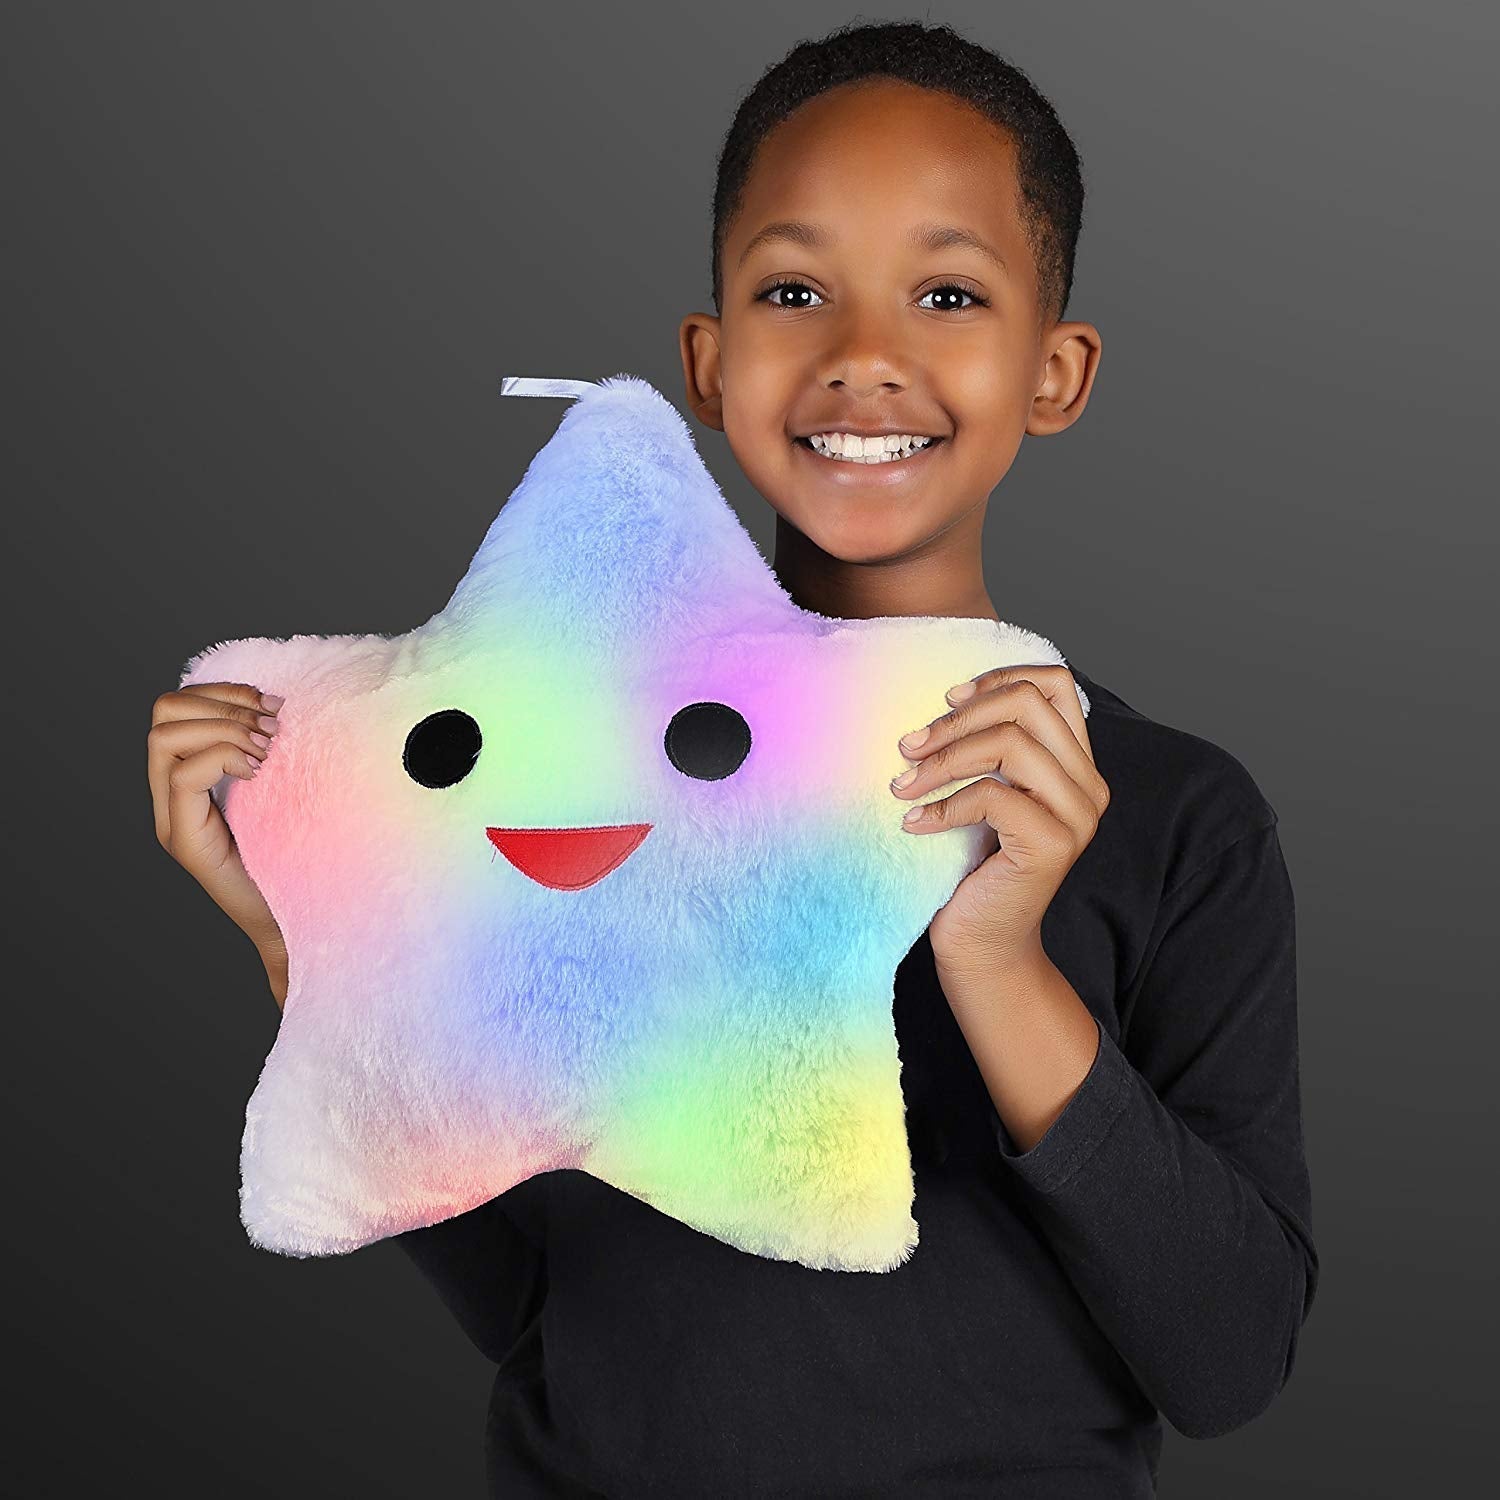 Bright Stars Cushion, This super Bright Stars tactile Bright Stars White Cushion is made from a delightful luxurious fur and has internal LED light's that light-up and alternate through a variety of subtle colours creating a true sensory calming experience. The Bright Stars Cushion is probably the softest light up cushion ever this innovative and unique sensory accessory is not only a cushion but a calming light up relaxant which creates a calming relaxing tactile experience. Bright Stars Cushion Create a c